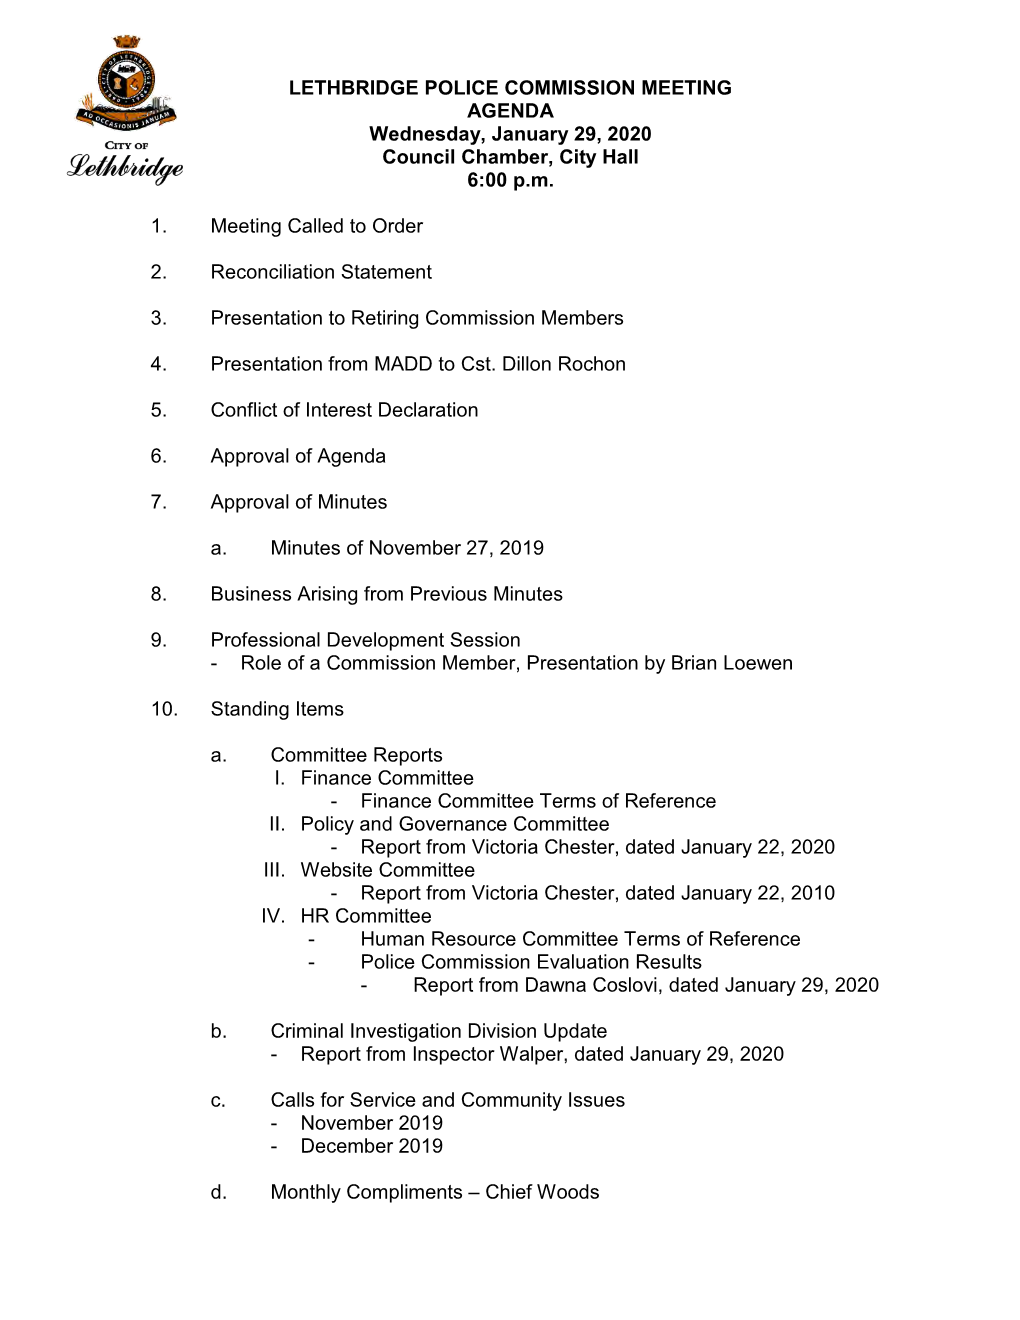 LETHBRIDGE POLICE COMMISSION MEETING AGENDA Wednesday, January 29, 2020 Council Chamber, City Hall 6:00 P.M